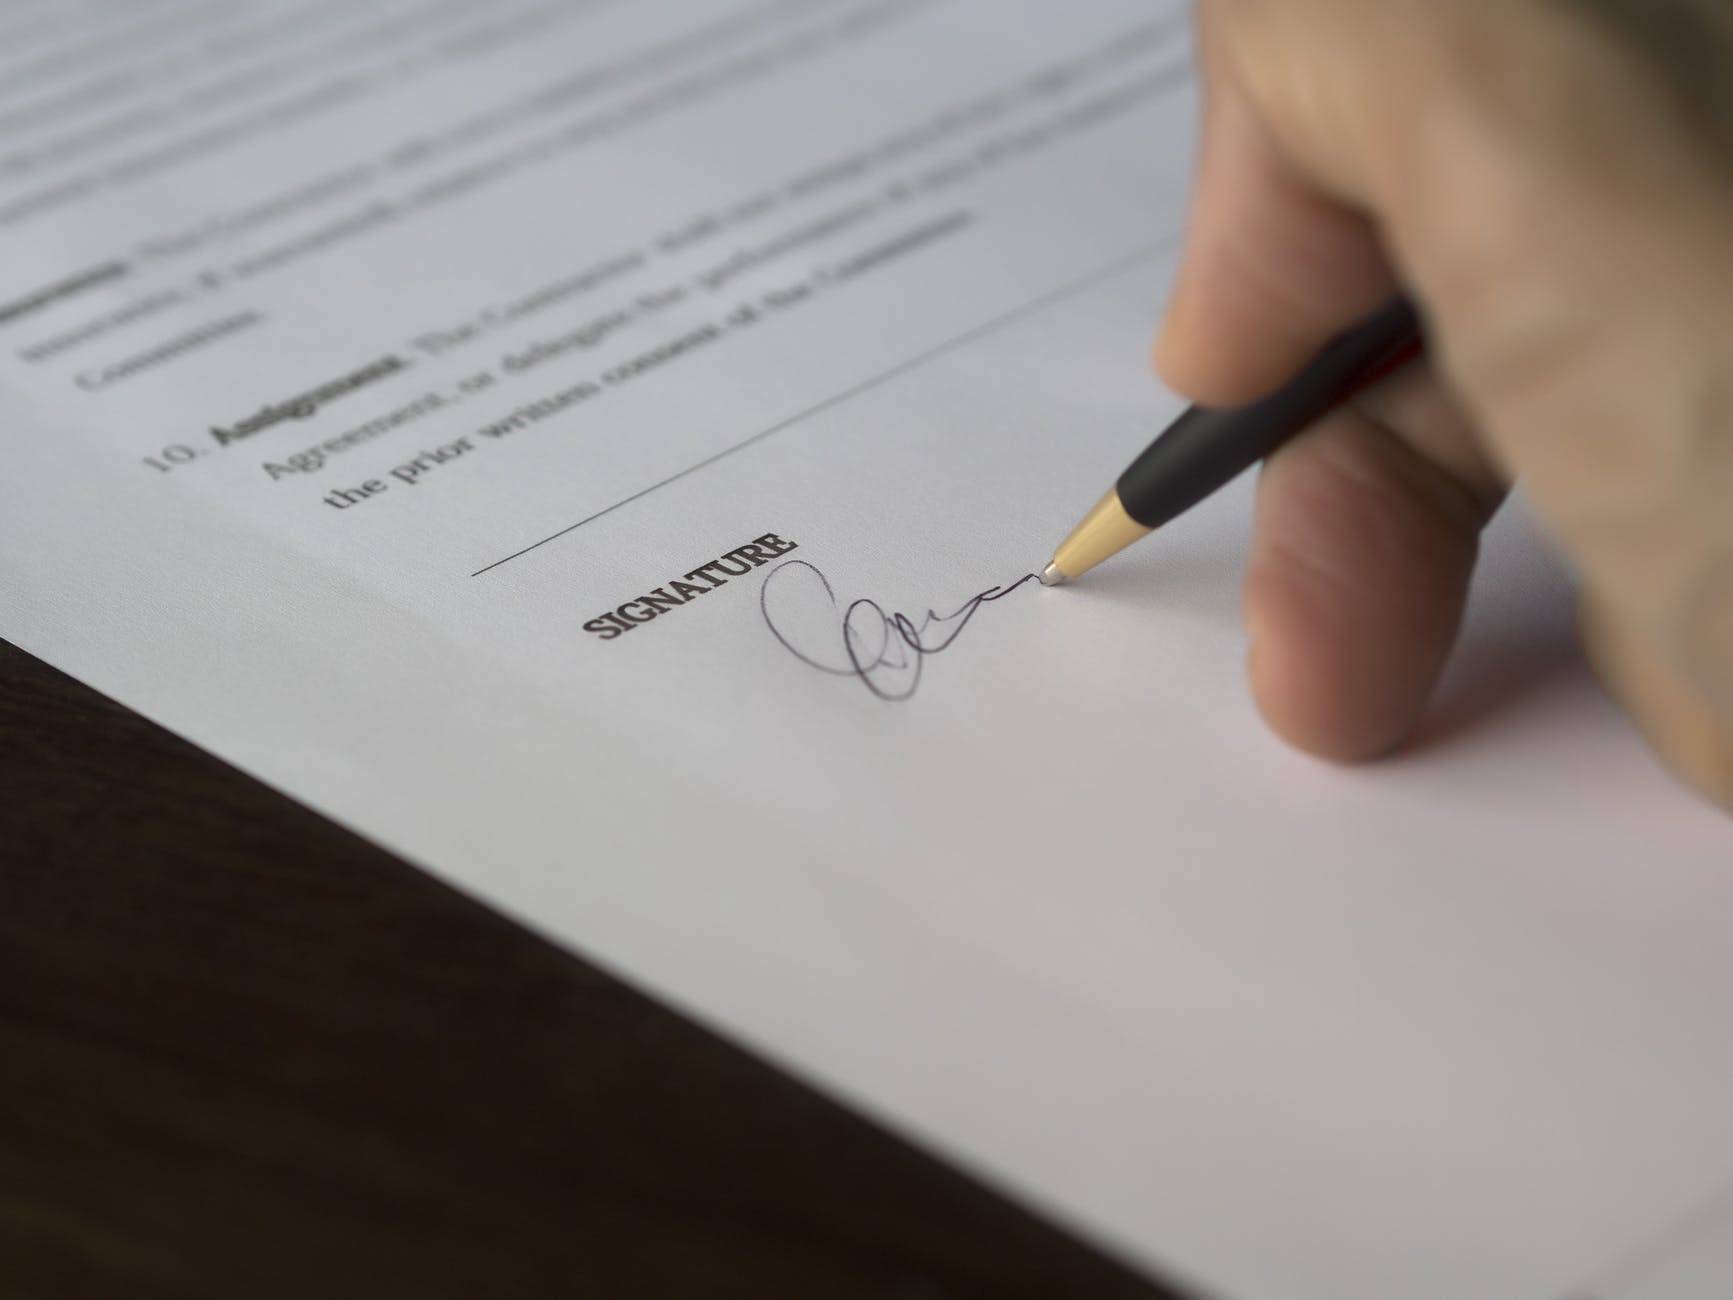 Person signing agreement